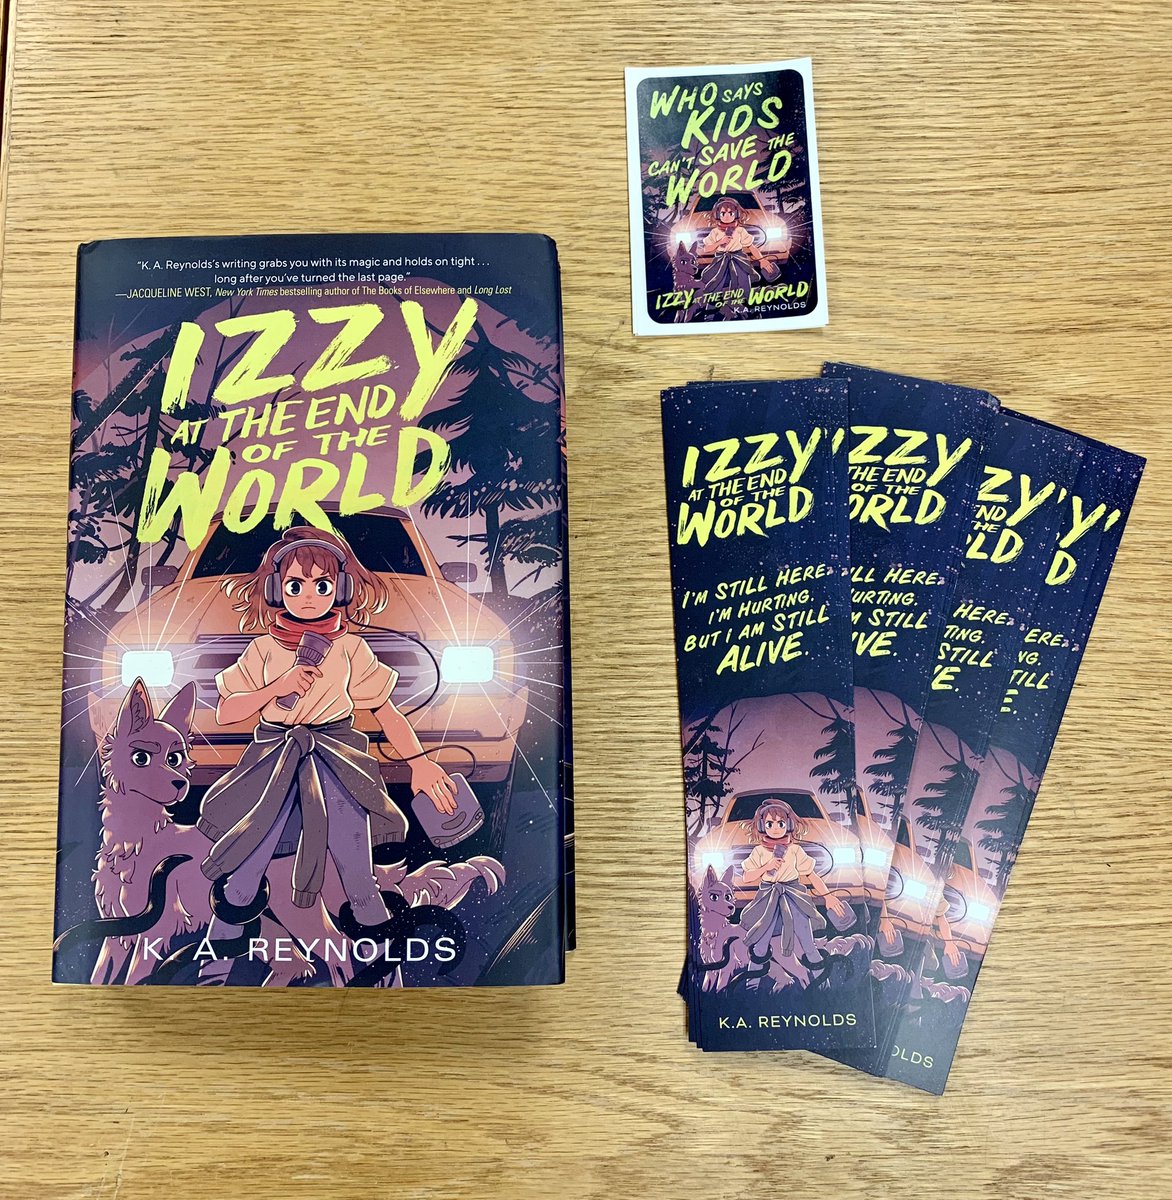 Thank you, @KrisRey19 for this copy of IZZY AT THE END OF THE WORLD! I can’t wait to introduce Izzy to the readers at my school! #mglit